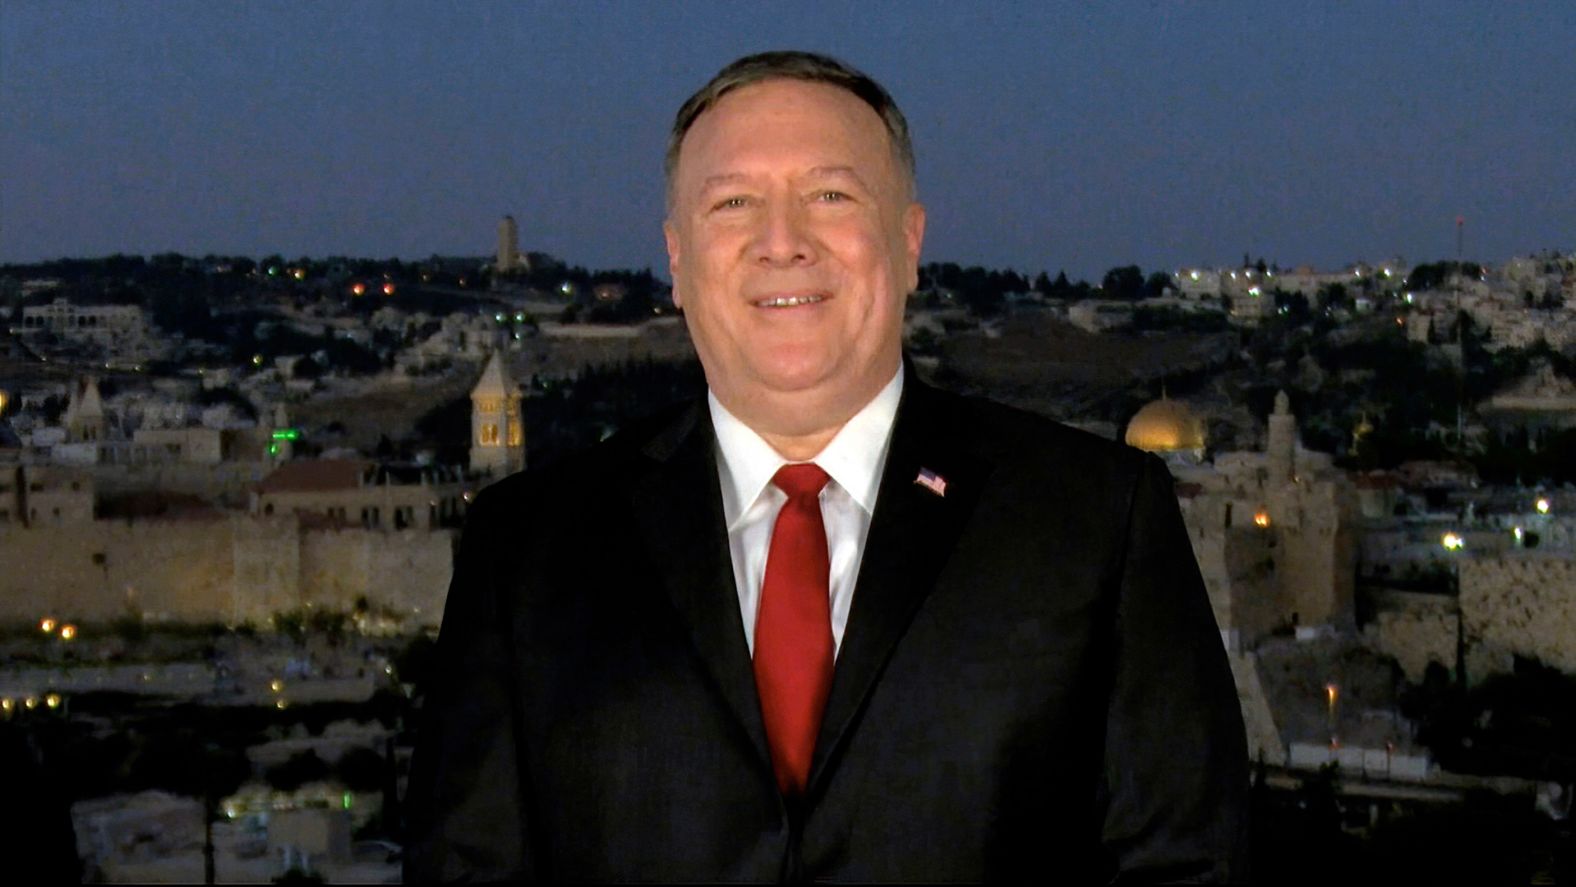 Secretary of State Mike Pompeo, <a href="index.php?page=&url=https%3A%2F%2Fwww.cnn.com%2Fpolitics%2Flive-news%2Frnc-2020-day-2%2Fh_c83d2fb668e08d9862ae814fc9418d66" target="_blank">speaking from a hotel rooftop in Jerusalem,</a> sought to cast Trump as the ultimate dealmaker. Pompeo's location highlighted a recent agreement between Israel and the United Arab Emirates to normalize relations that Trump helped broker. Pompeo's remarks <a href="index.php?page=&url=https%3A%2F%2Fwww.cnn.com%2F2020%2F08%2F25%2Fpolitics%2Fcastro-investigation-pompeo-rnc-speech%2Findex.html" target="_blank">break with past precedent</a> of secretaries of state not addressing political conventions. There is also a long-standing protocol of not discussing domestic politics while abroad.